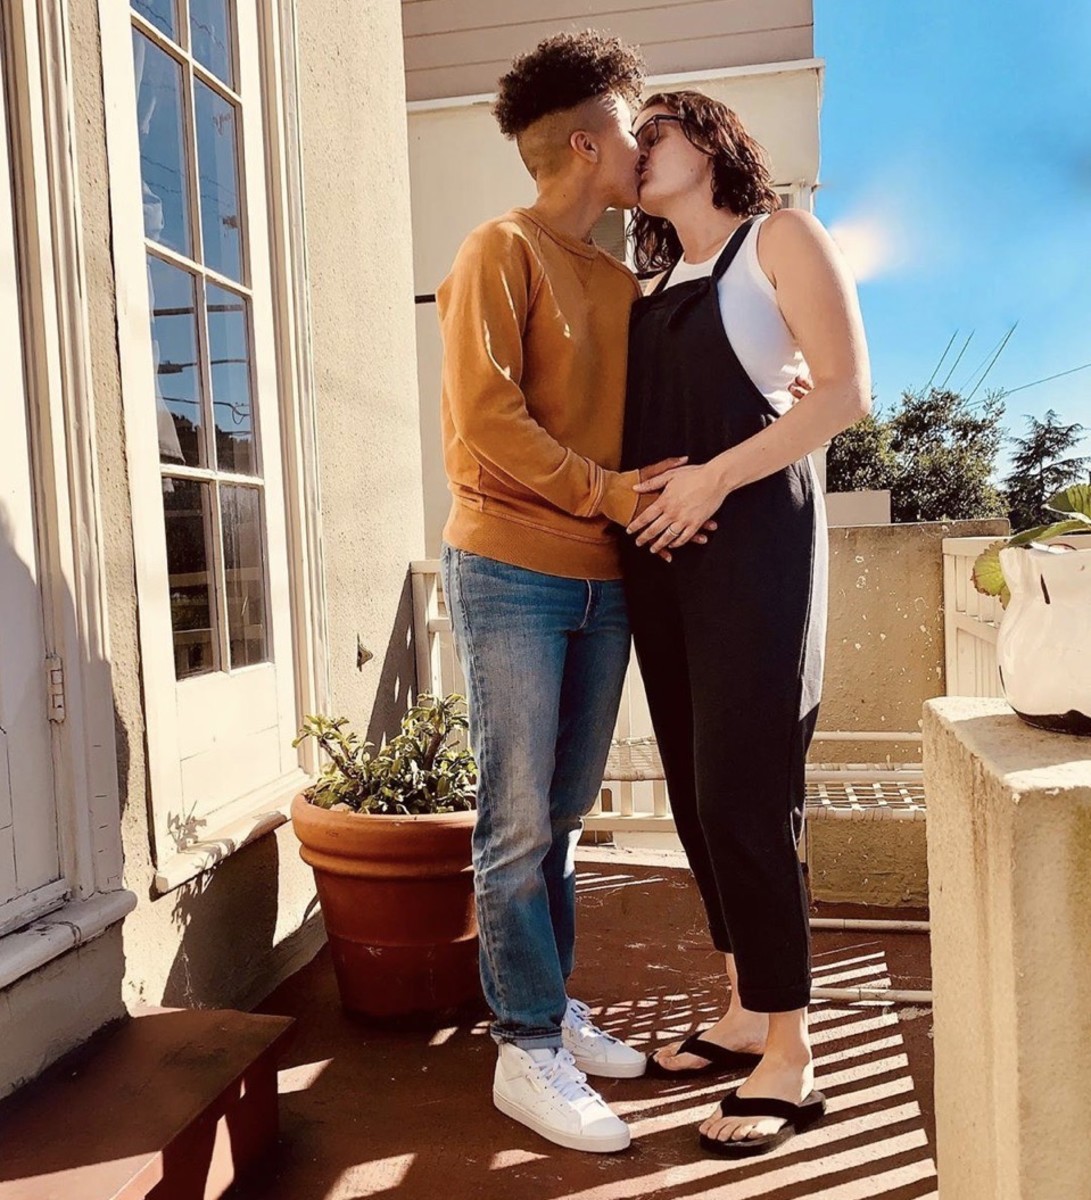 Layshia Clarendon and her pregnant wife Jessica